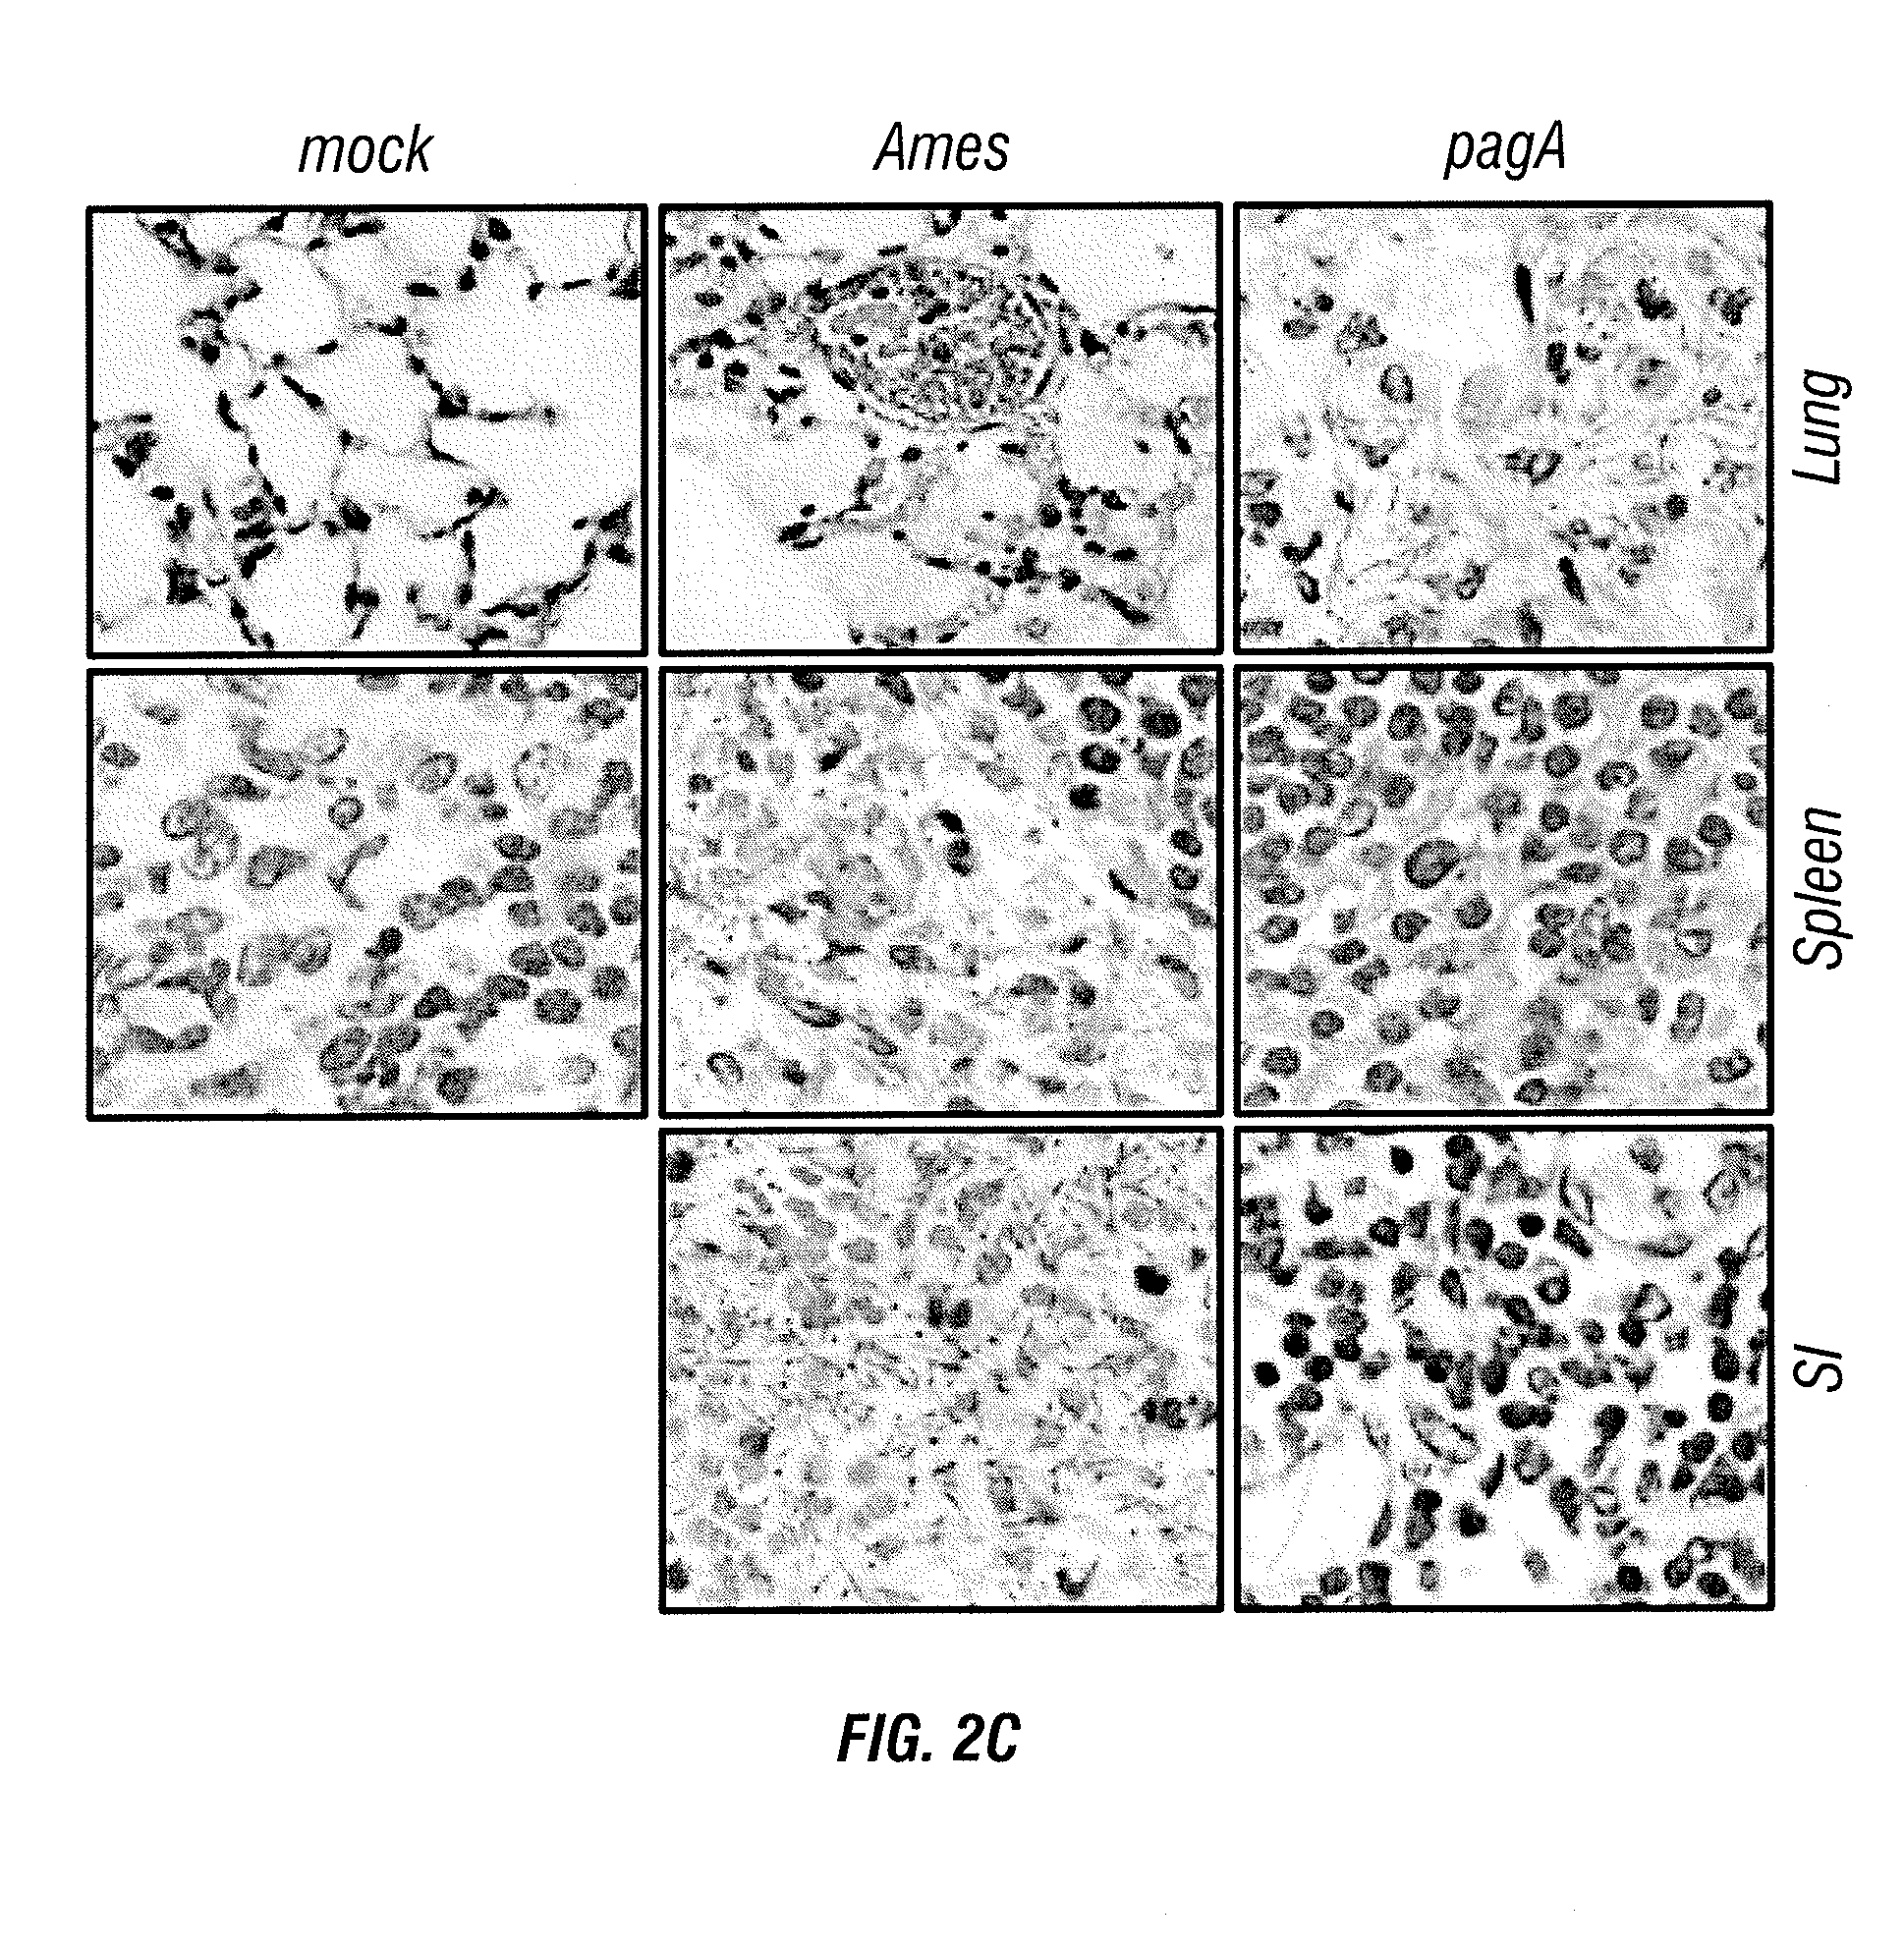 Immunogenic protein conjugates and method for making and using the same